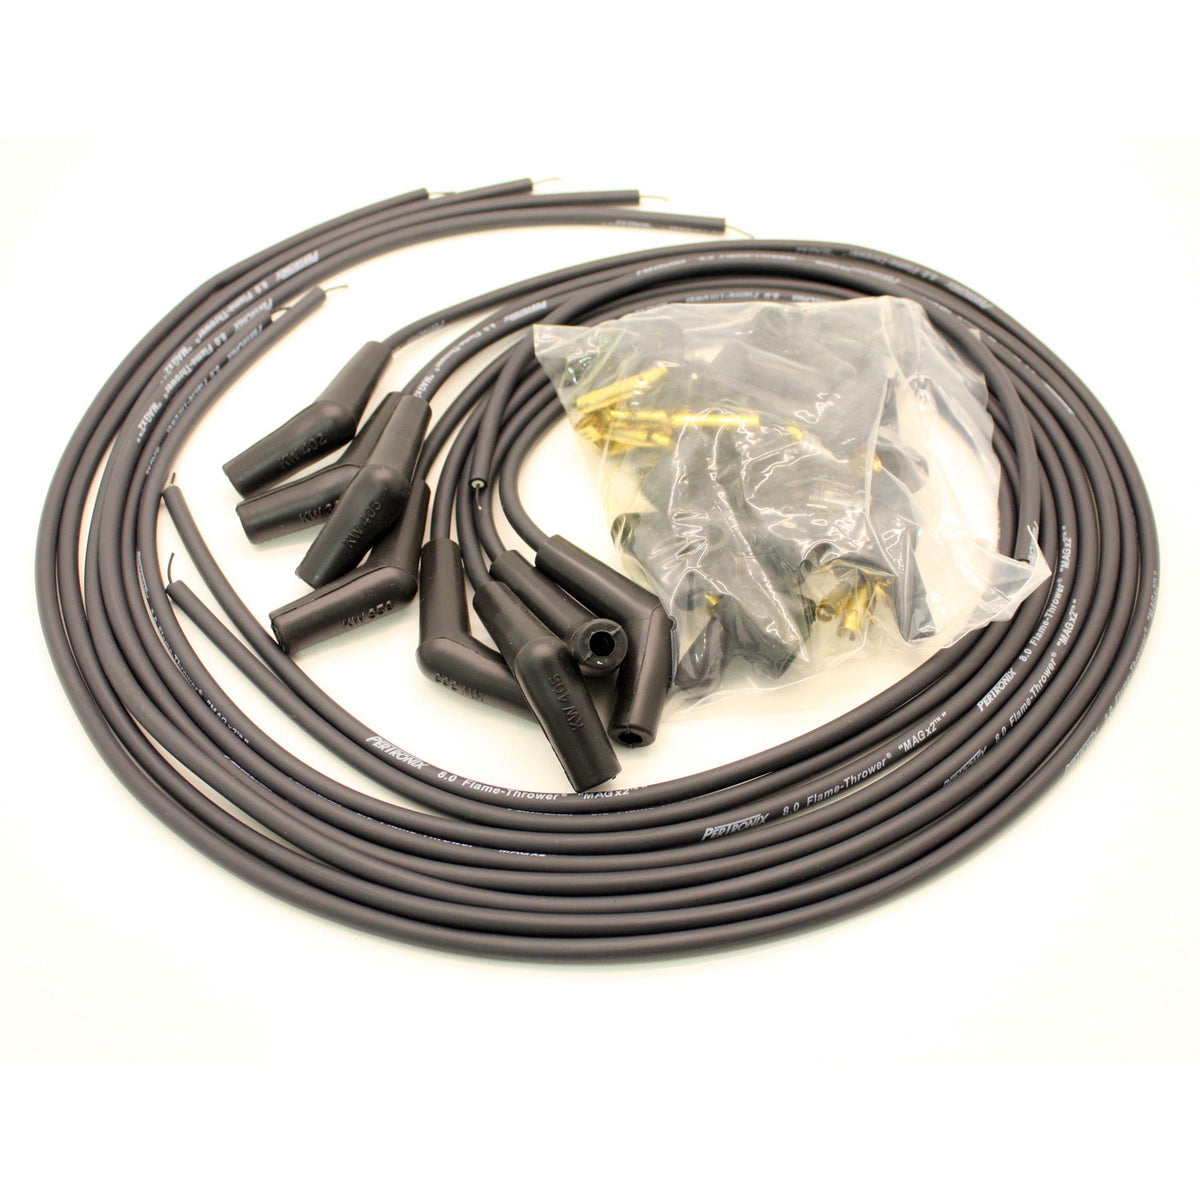 PerTronix 808215 Flame-Thrower Spark Plug Wires 8 cyl 8mm